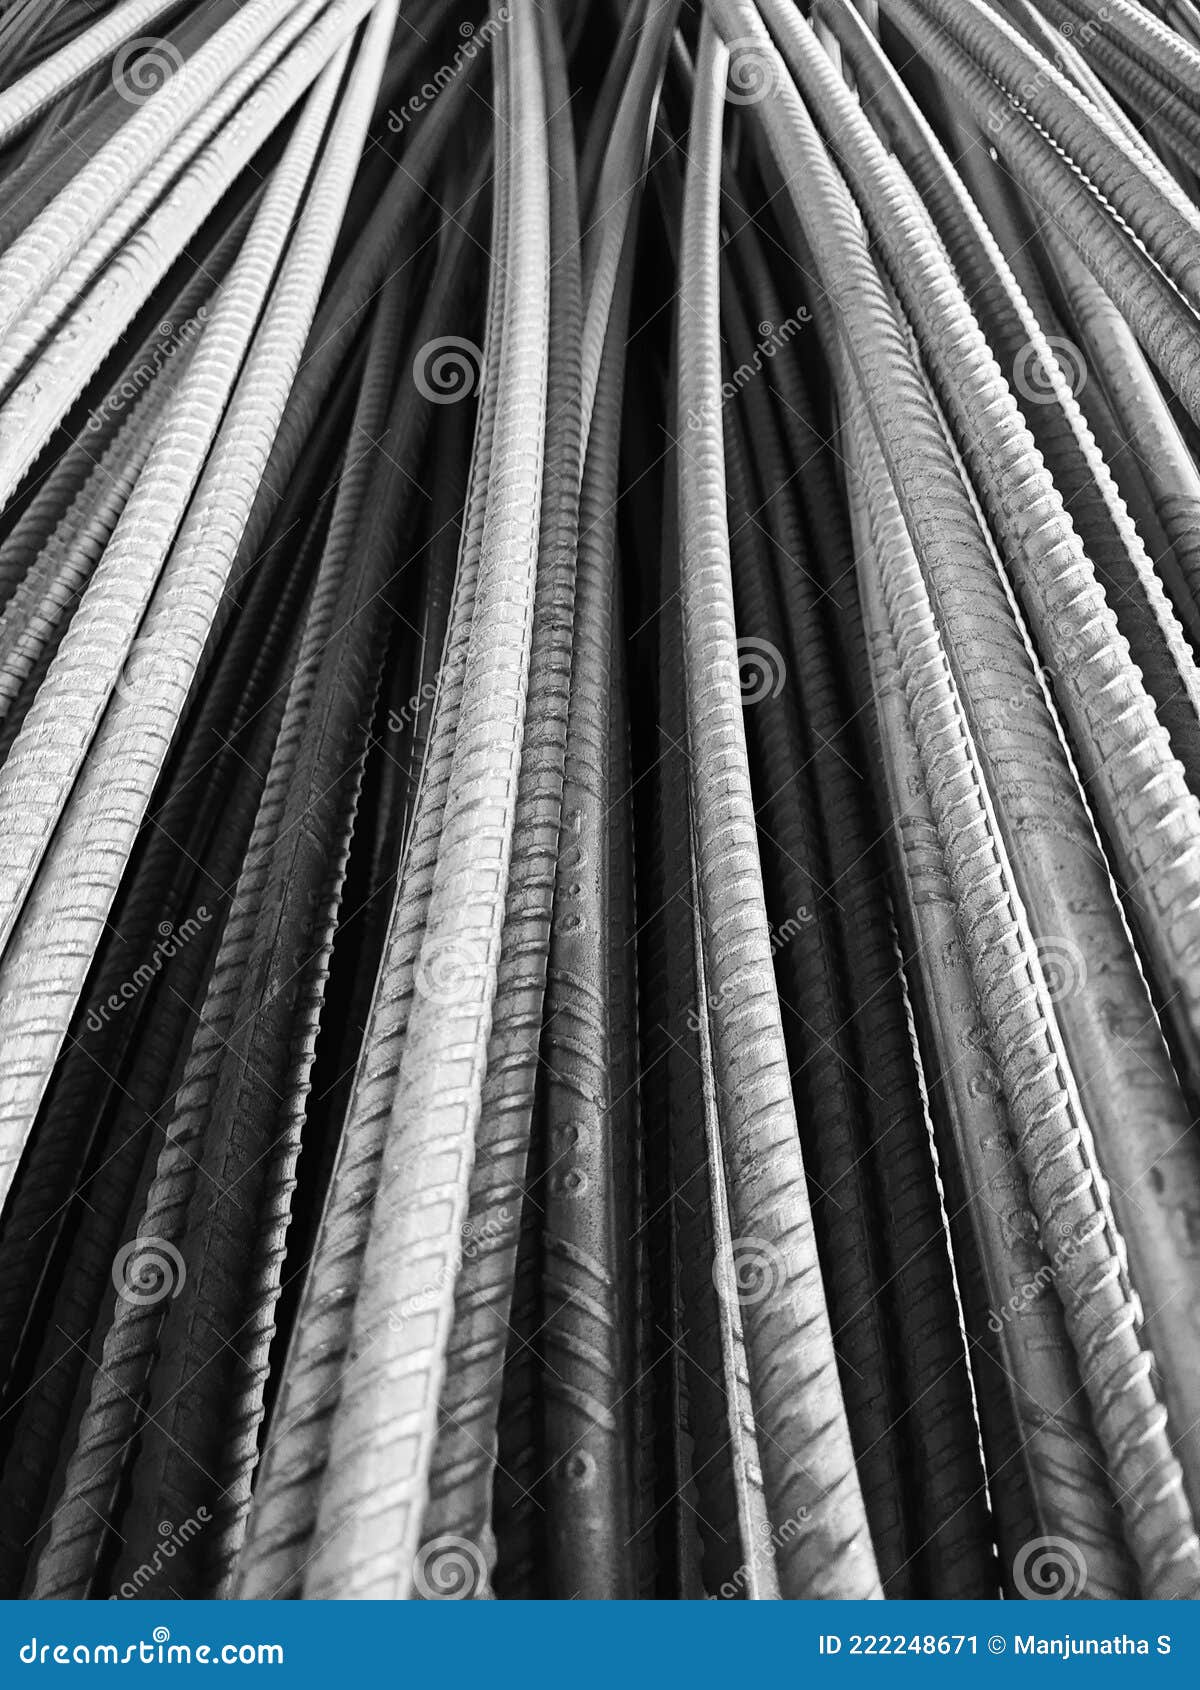 Thermaly Treatment Tmt Steel Bars House Stock Photo 1822148933